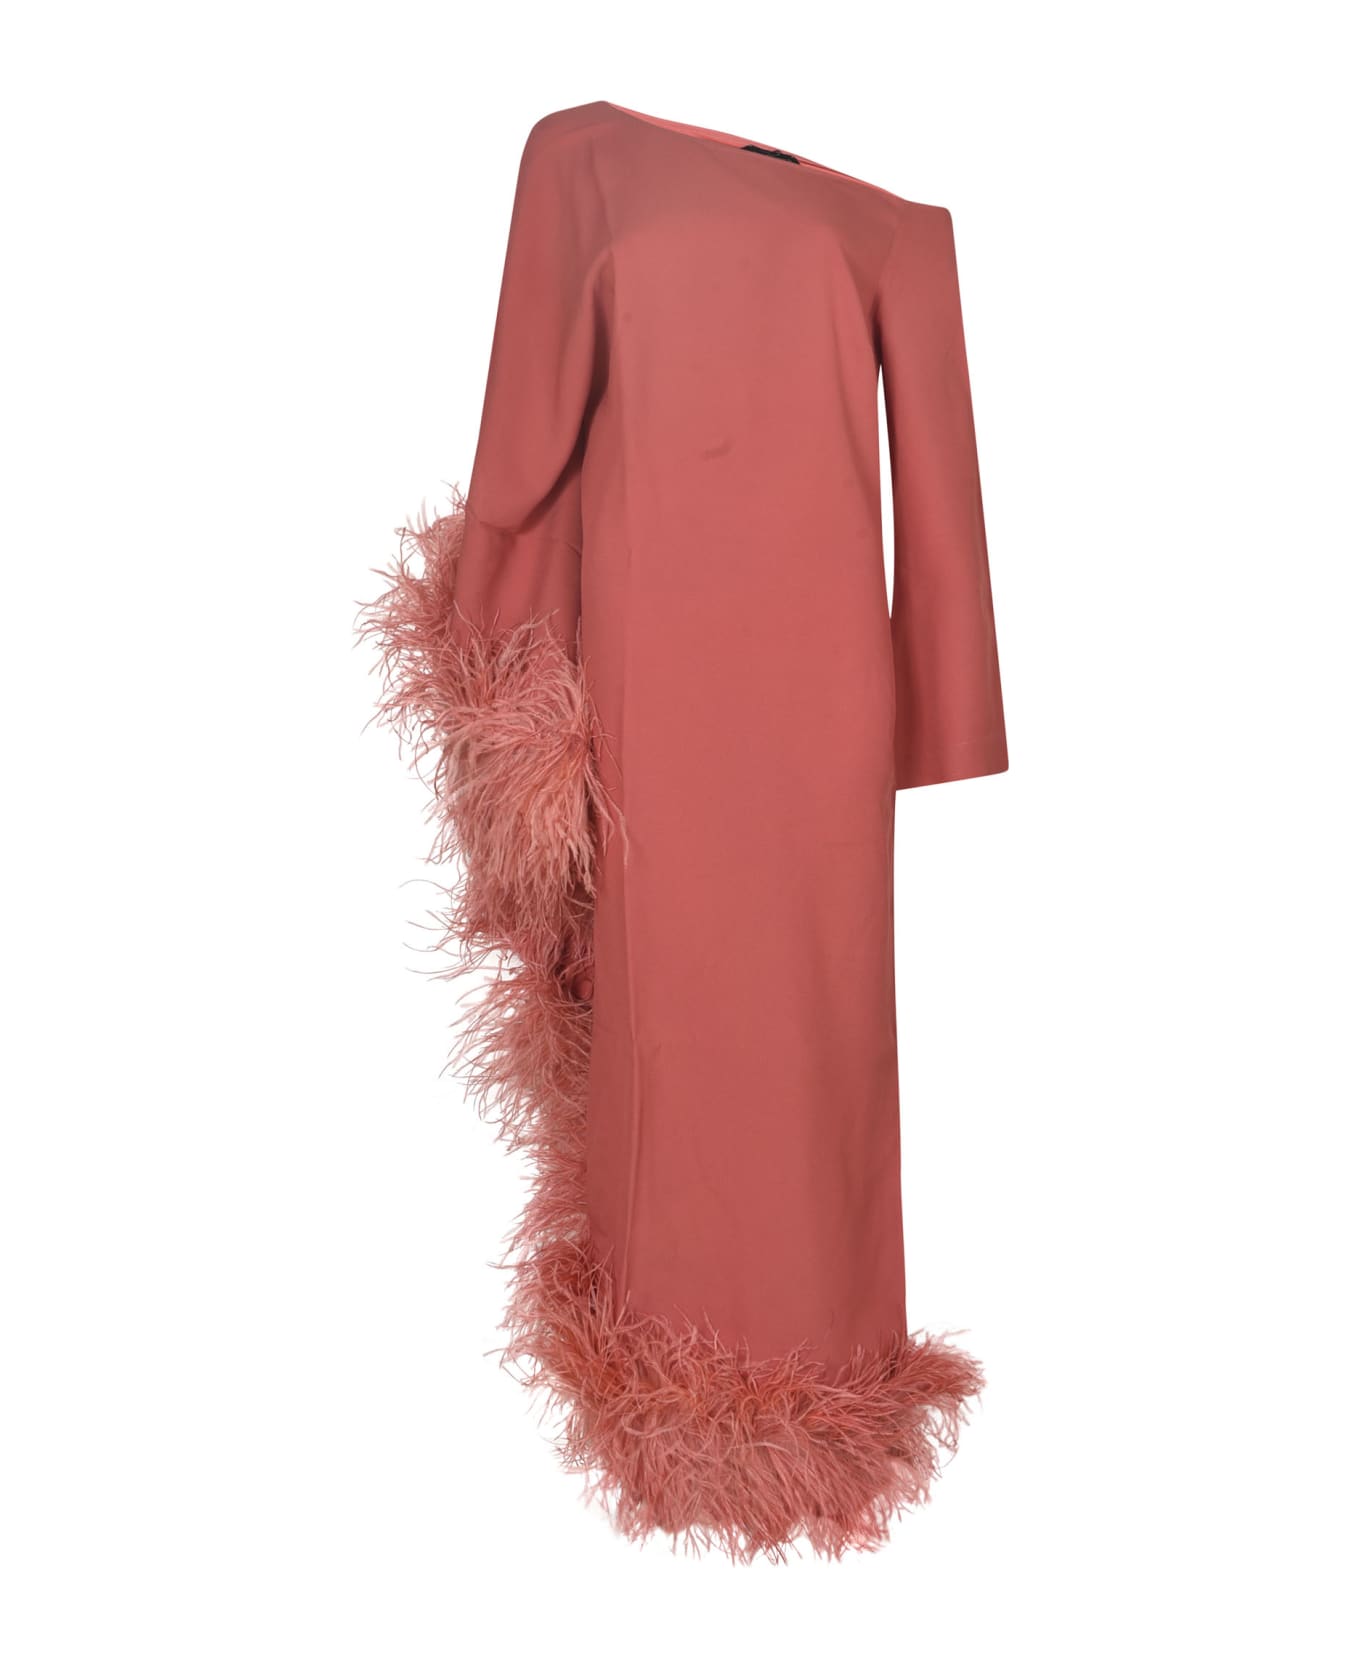 Taller Marmo Feathered Cuff One-shoulder Long Dress - PINK